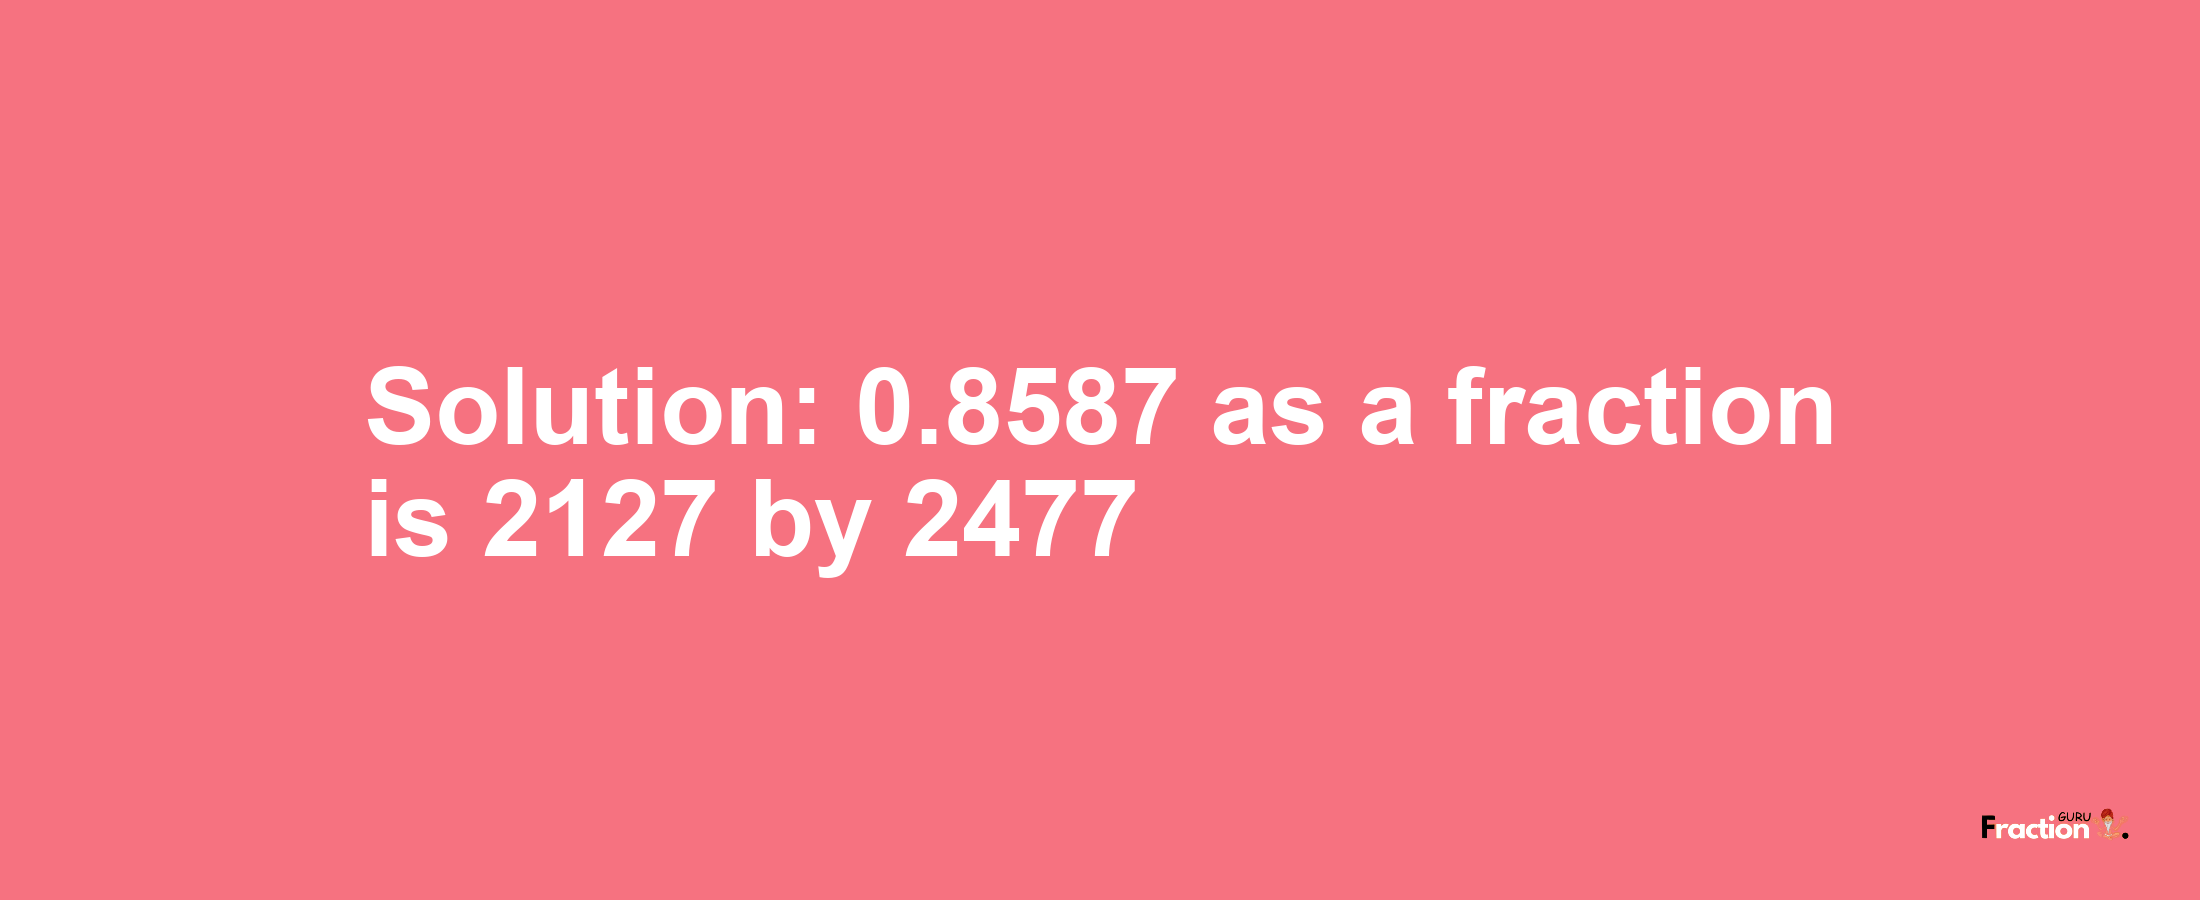 Solution:0.8587 as a fraction is 2127/2477